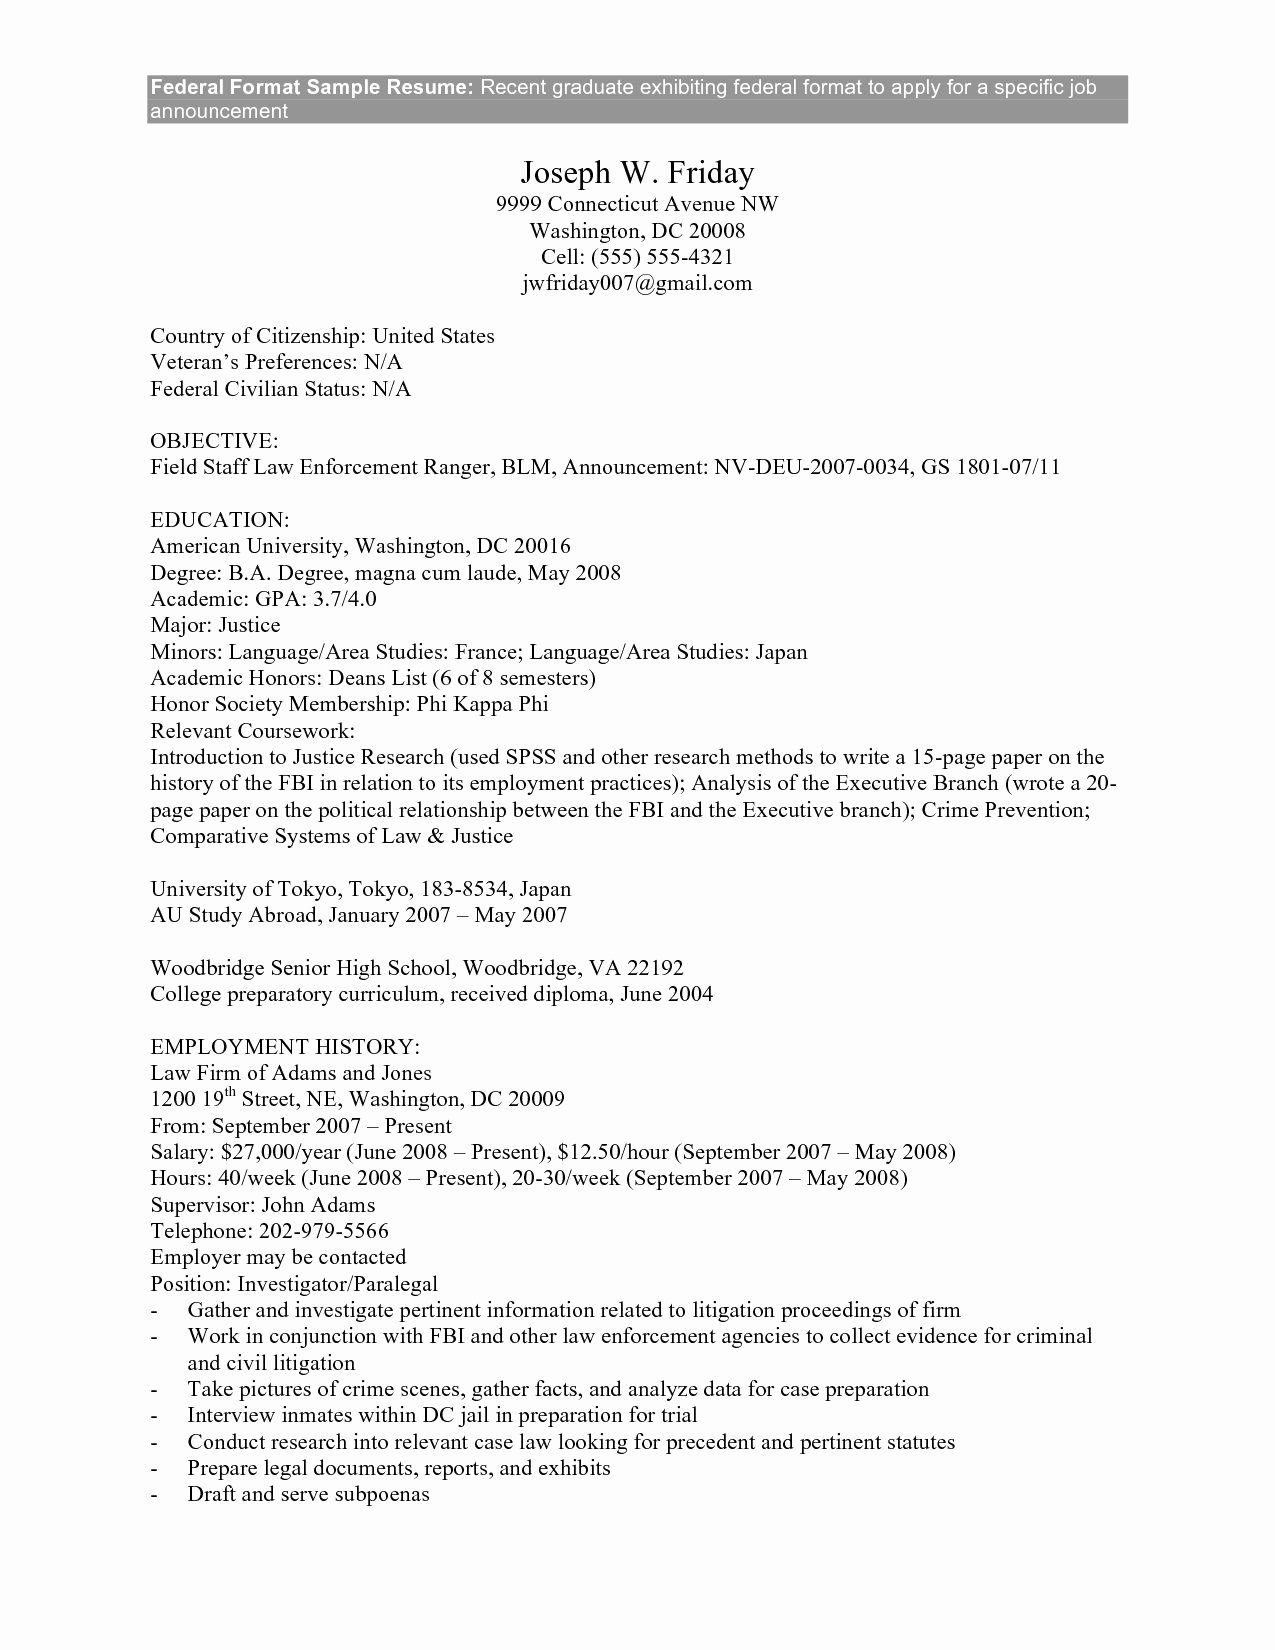 Sample Resumes for Federal Jobs Luxury Federal Government Resume Example Federal Government